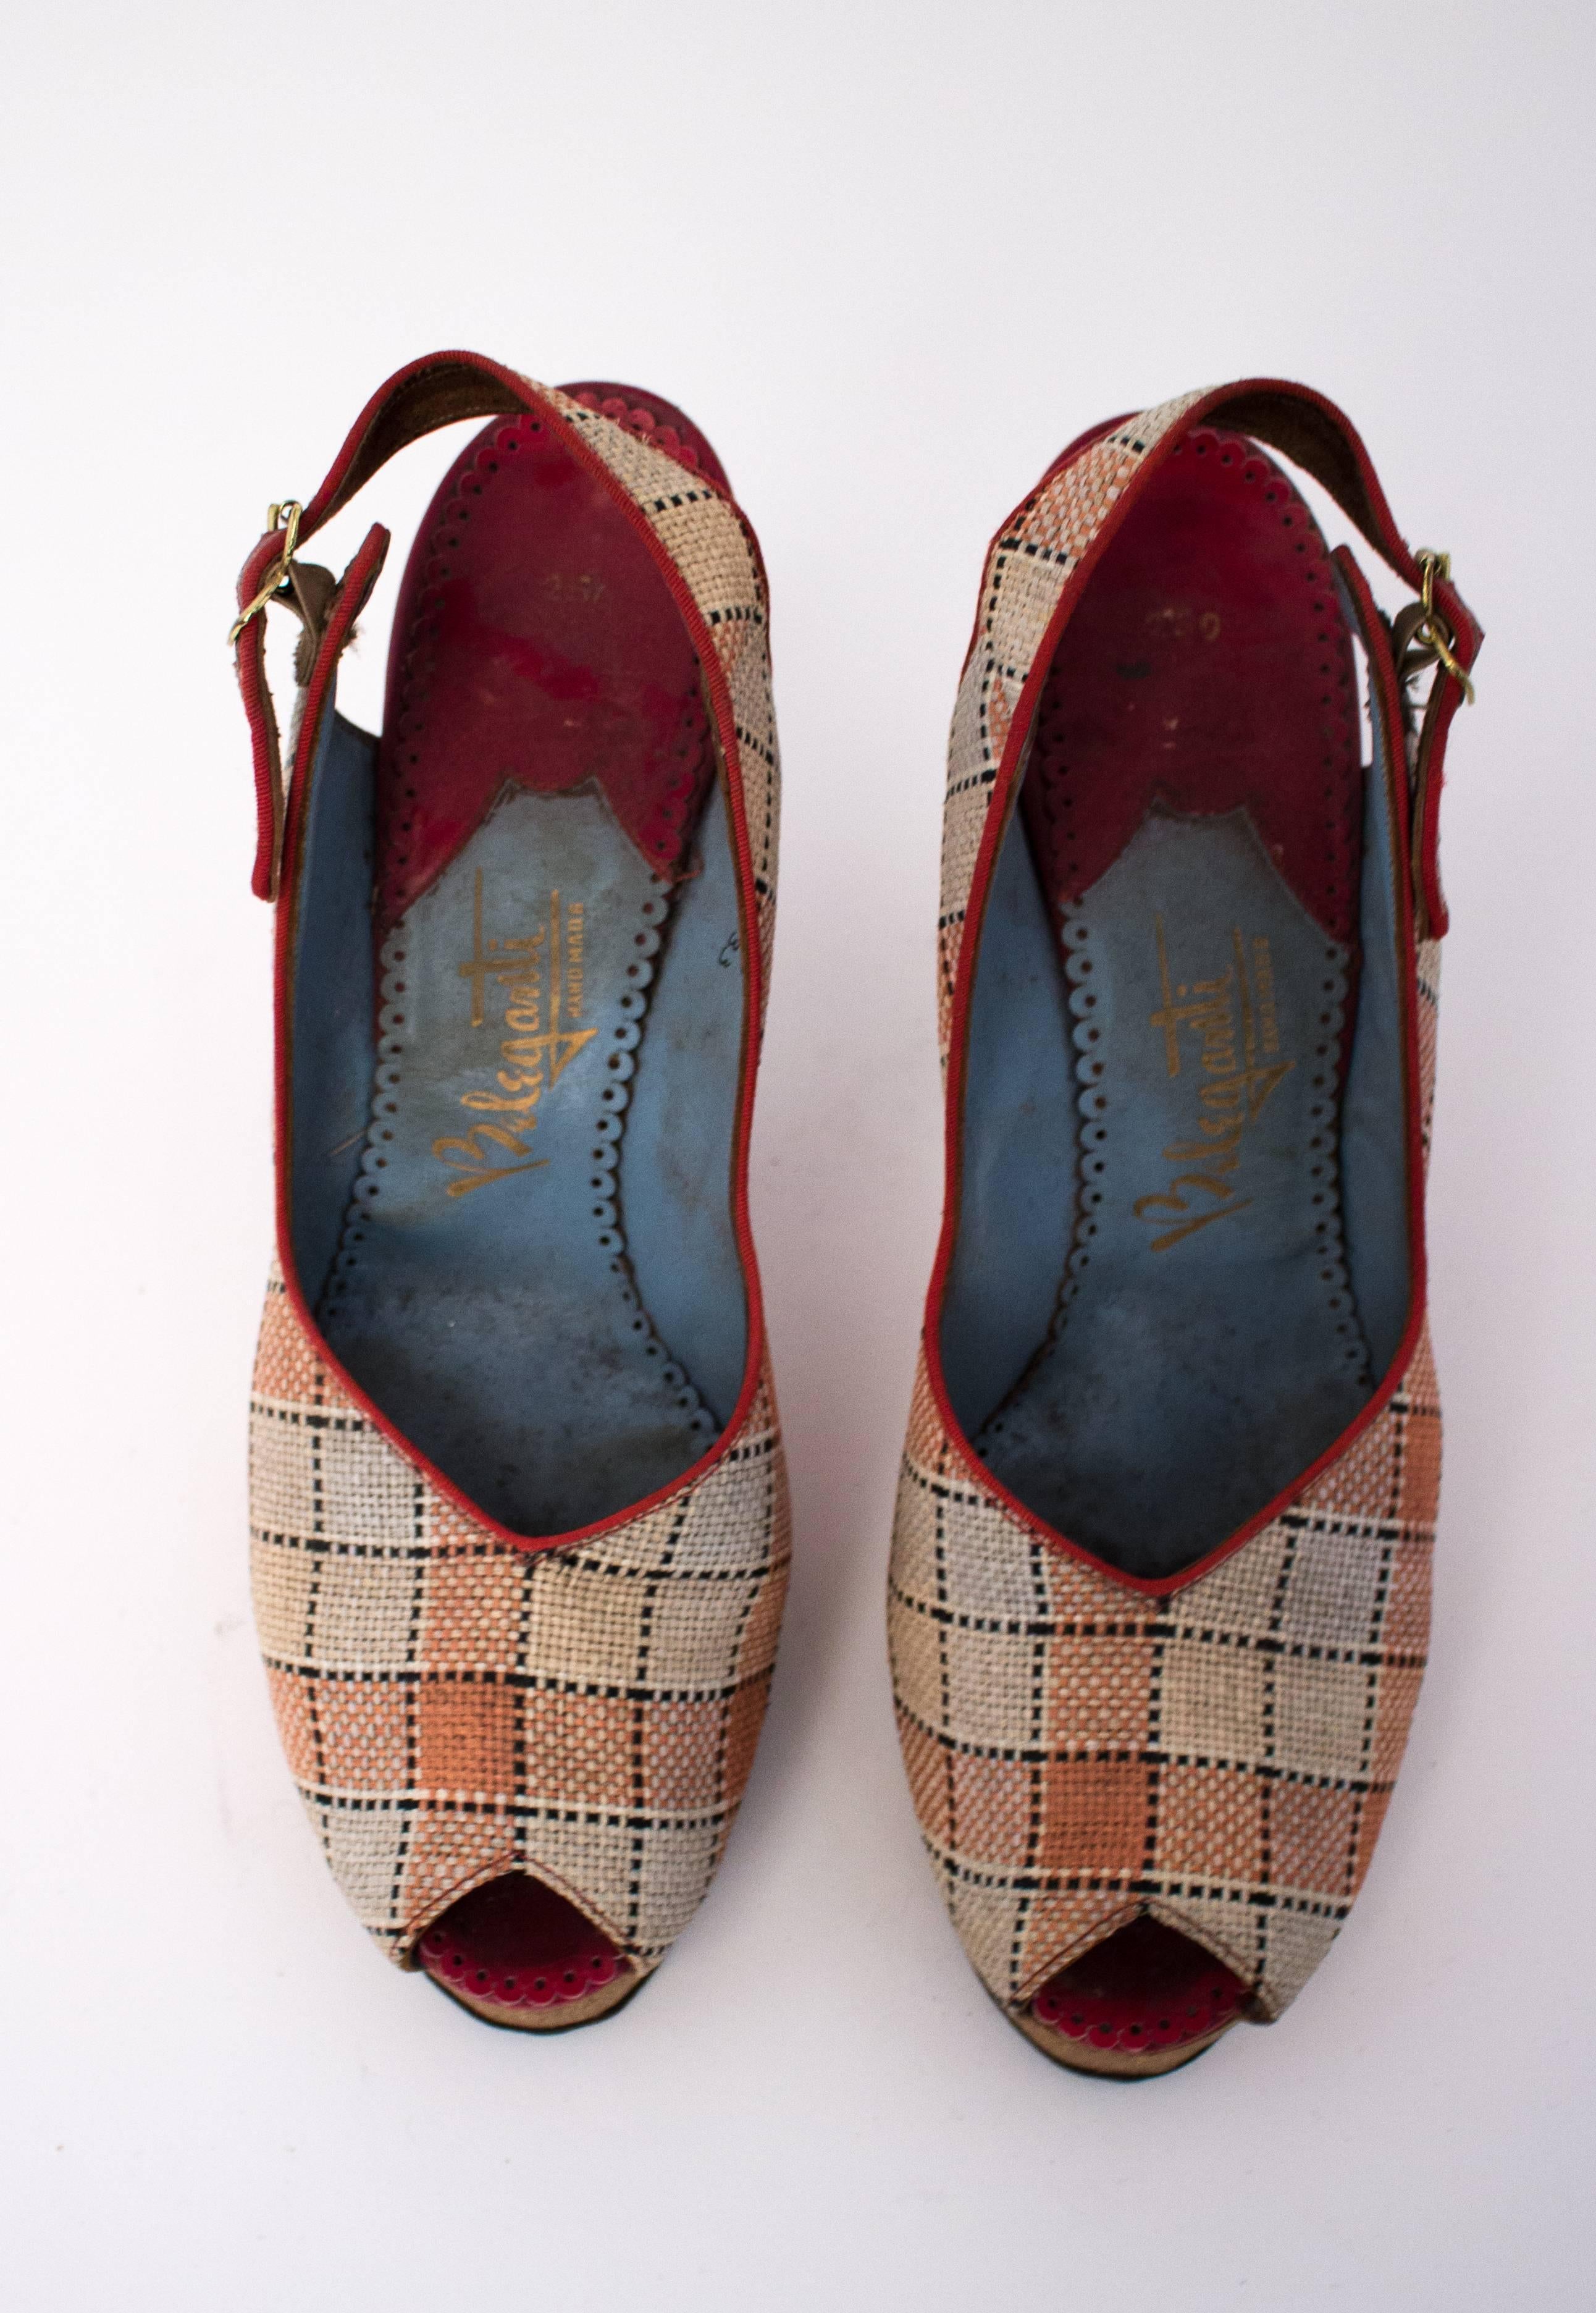 40s Plaid Platform Peep-toe Cork Heels. Heels may have been covered in cork, but it is now removed to reveal an olive green linen type fabric. Leather soles. Metal reinforcements on heels. Gold tone buckles. 

Measurements:
Insole: 9